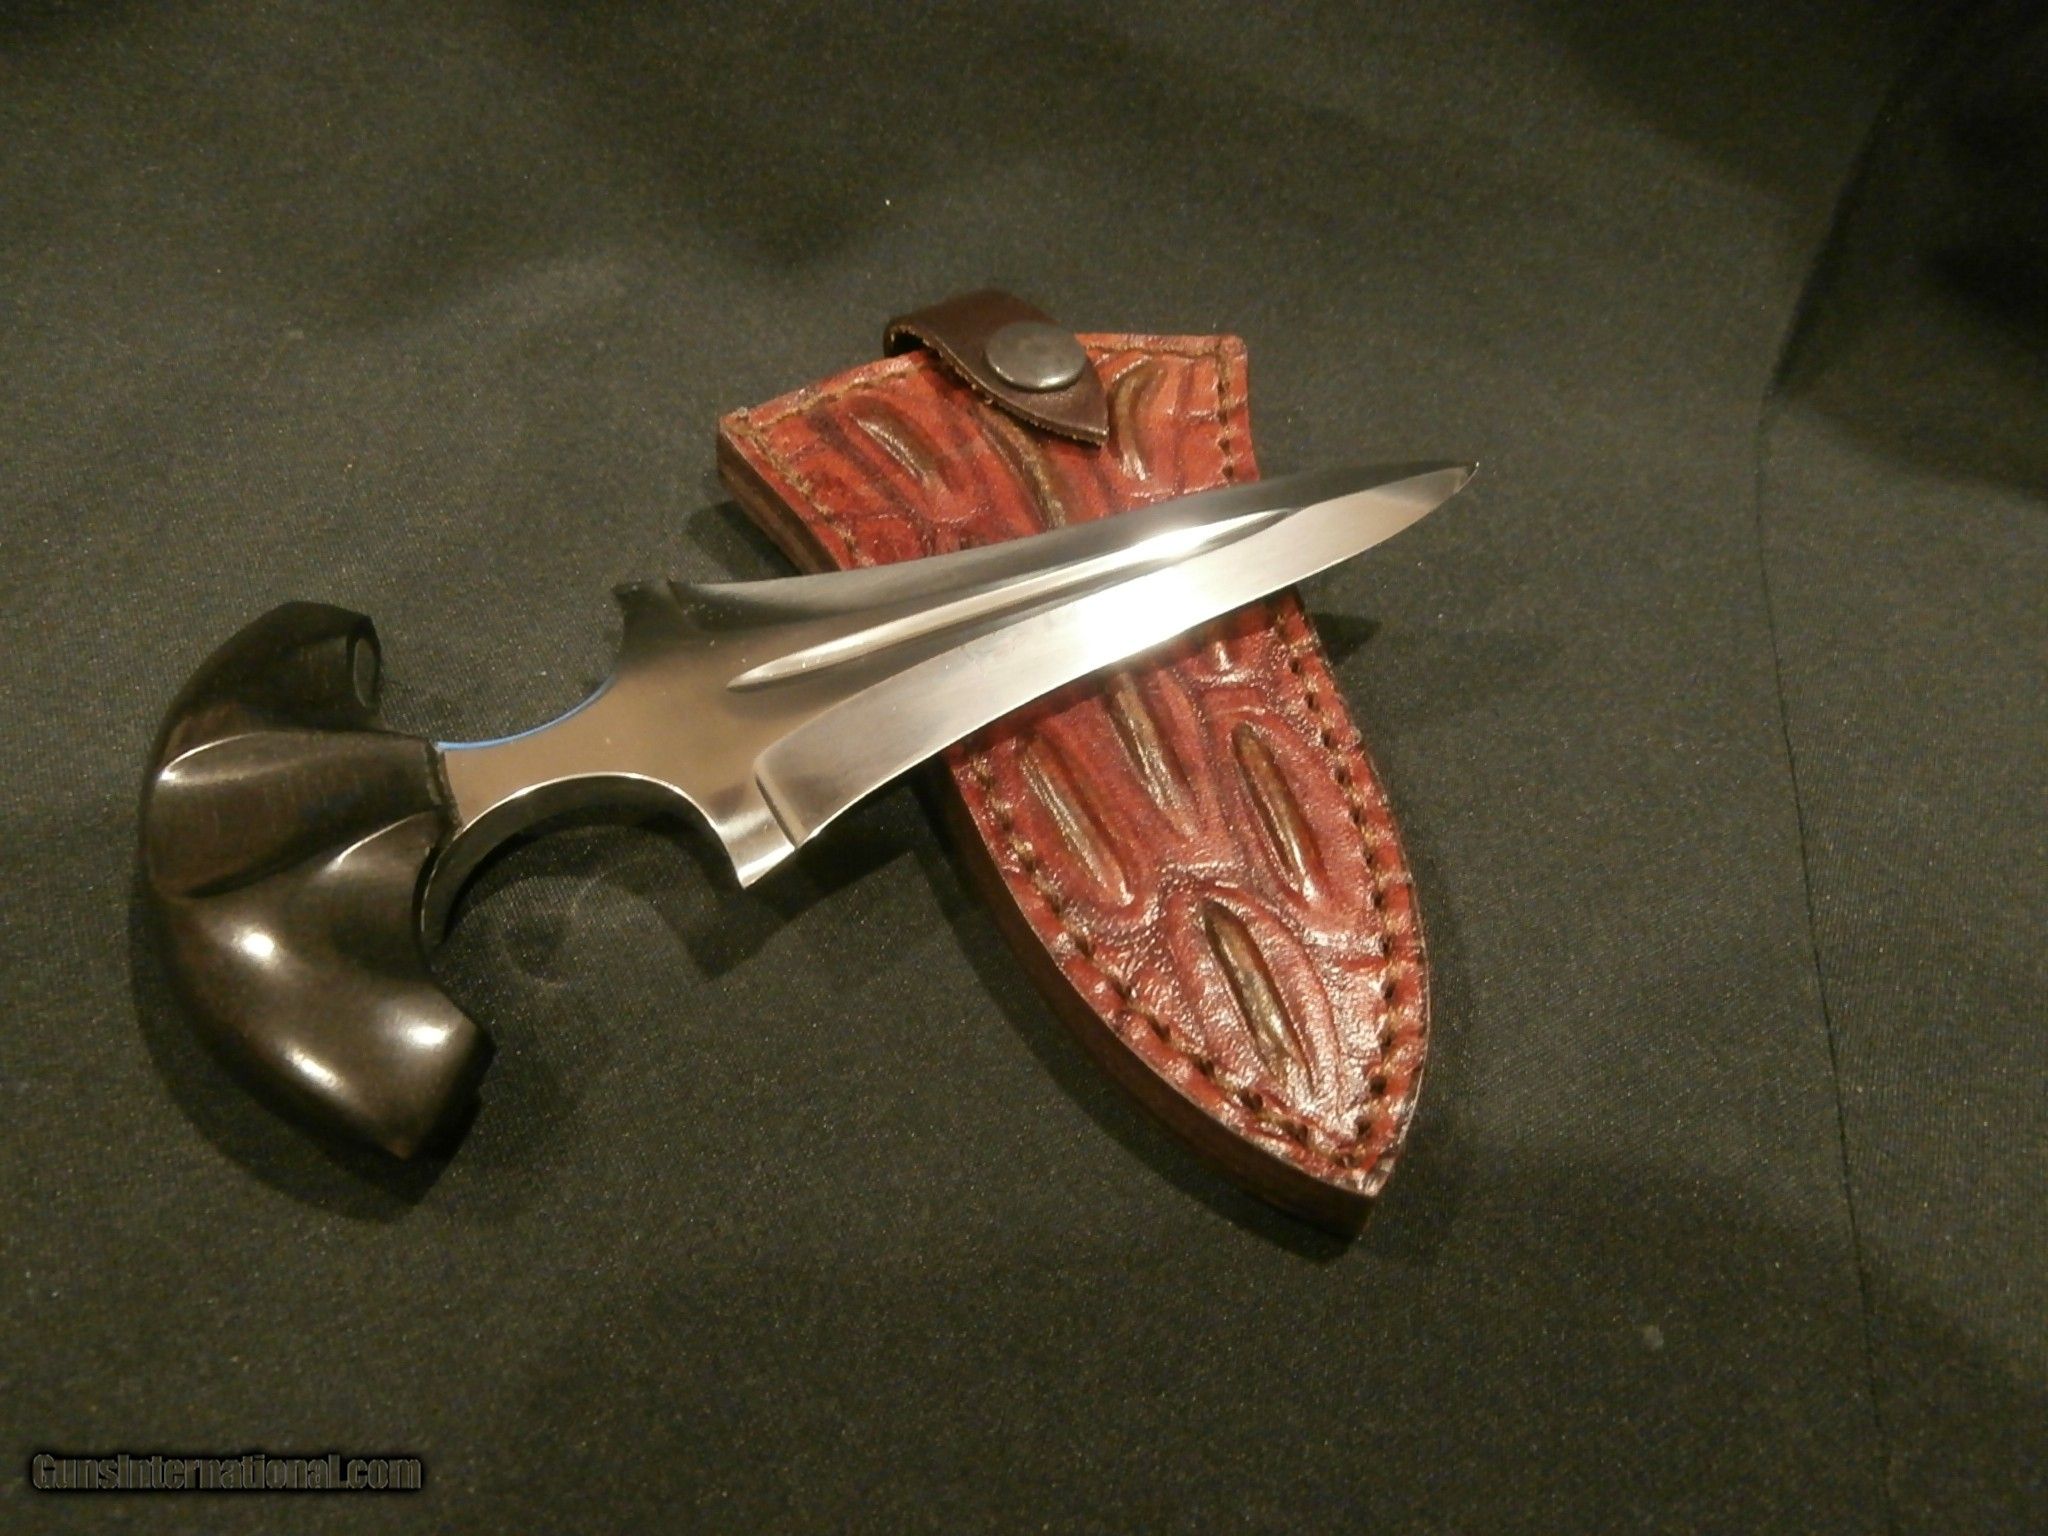 PENTI TURUNEN. KNIFE, handle in Masur birch, button in amber. Weapons &  Militaria - Edged weapons - Auctionet